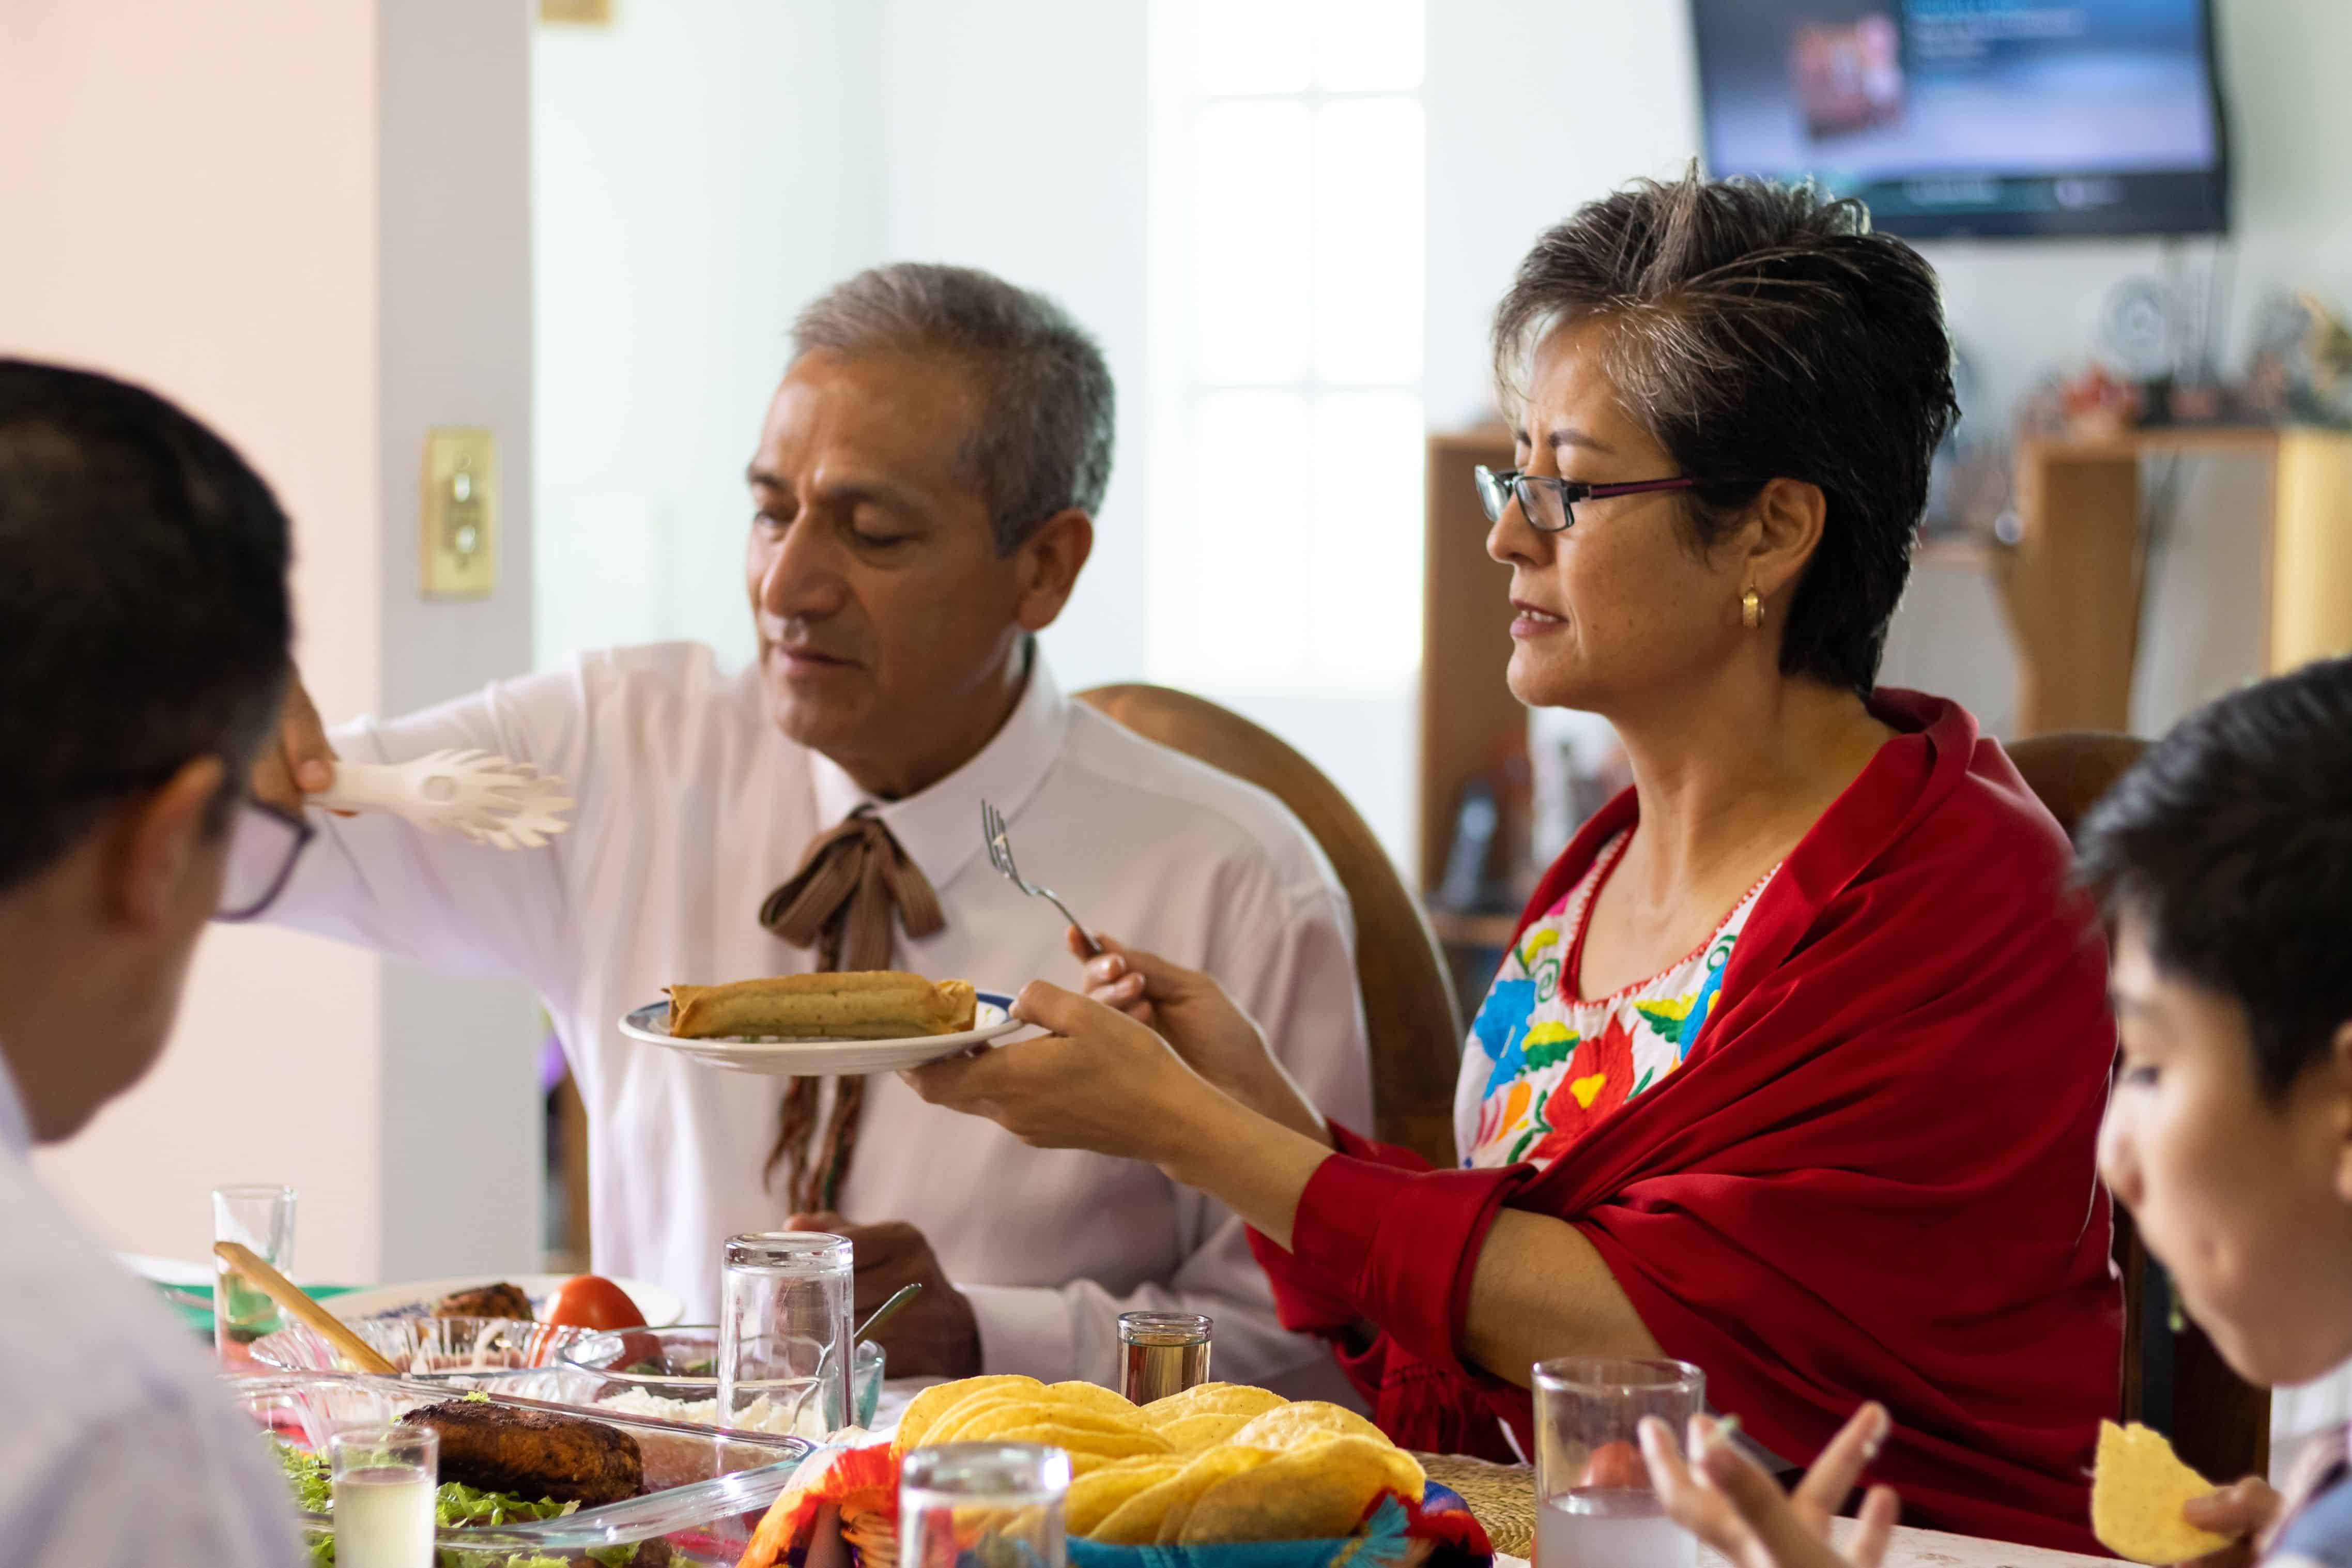 A married couple lives together during a family dinner in Mexico. An adult woman holds a plate while her husband serves her tacos during a family reunion to celebrate Mexican independence.